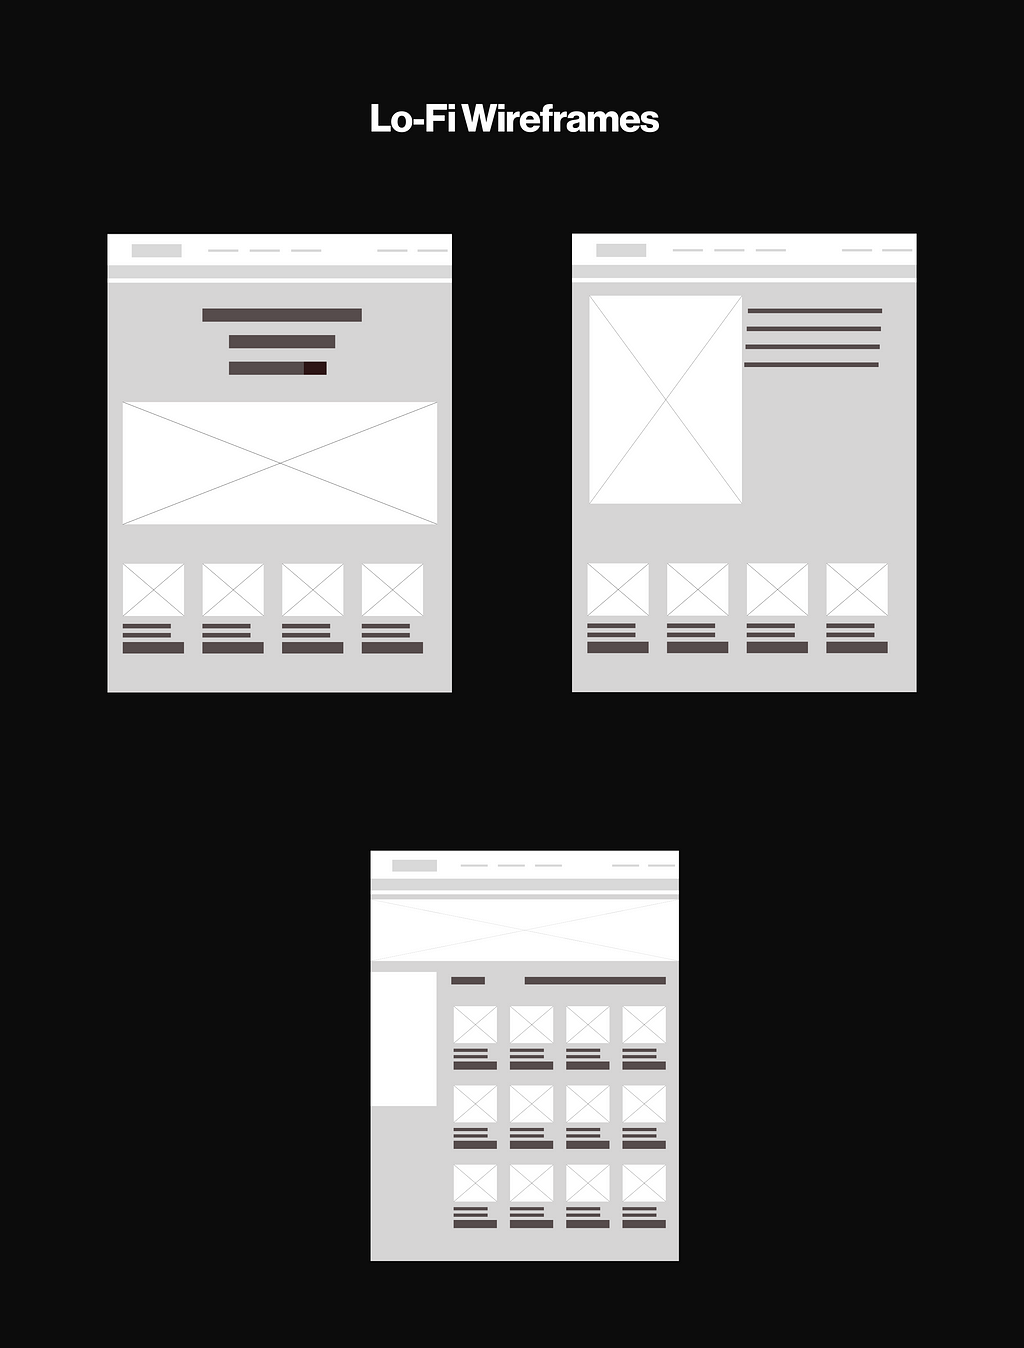 here are some lo-fi wireframes